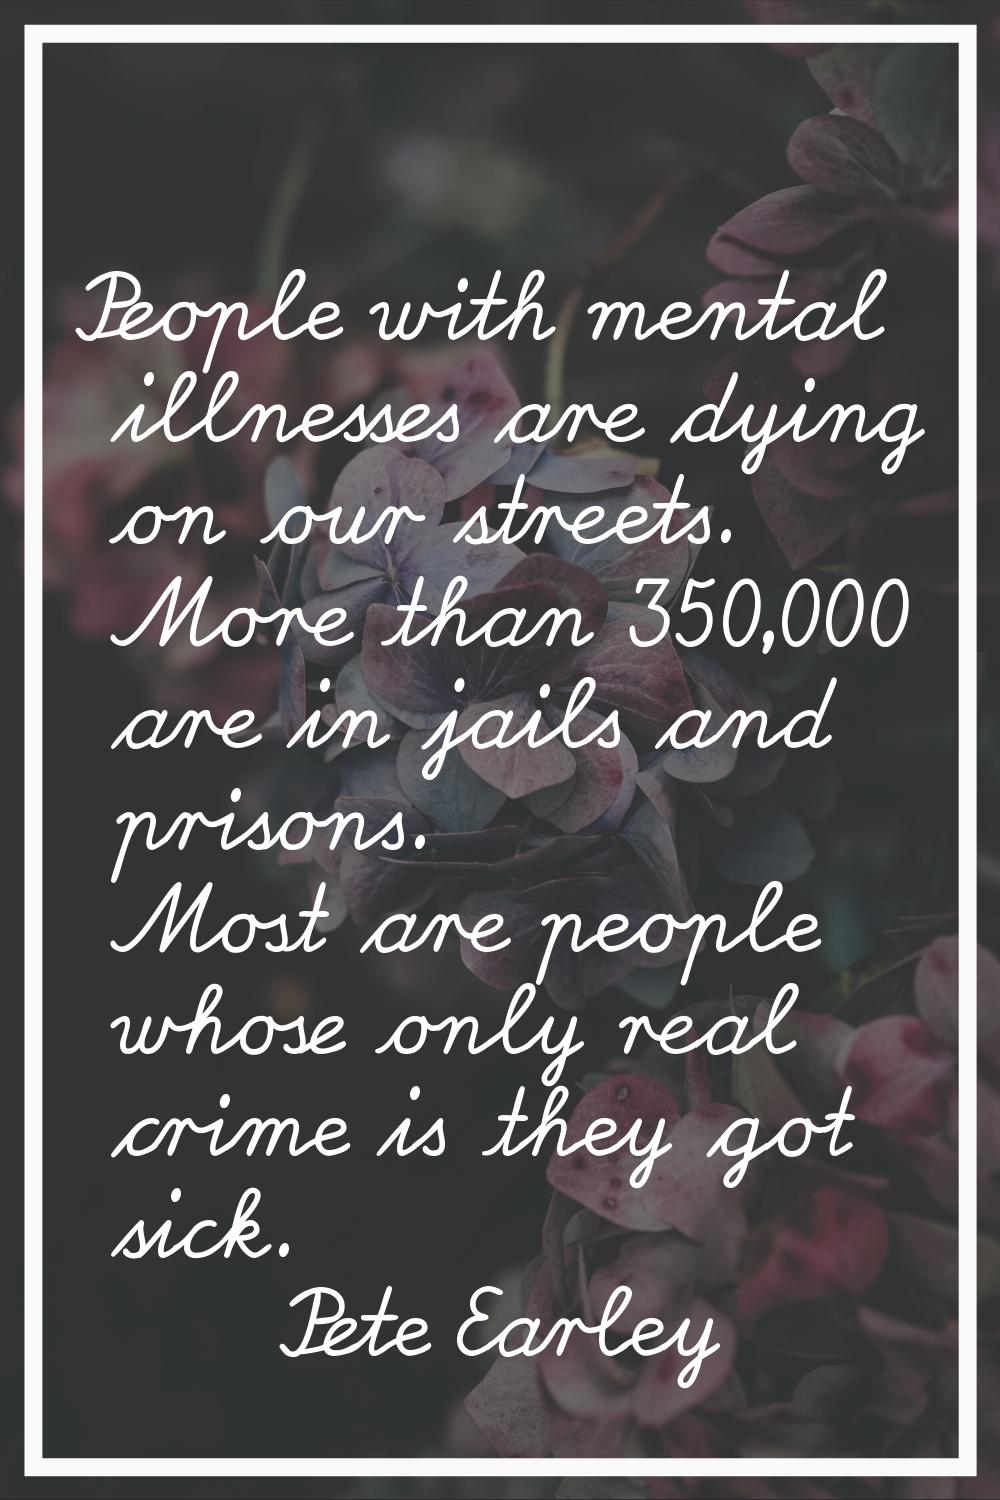 People with mental illnesses are dying on our streets. More than 350,000 are in jails and prisons. 